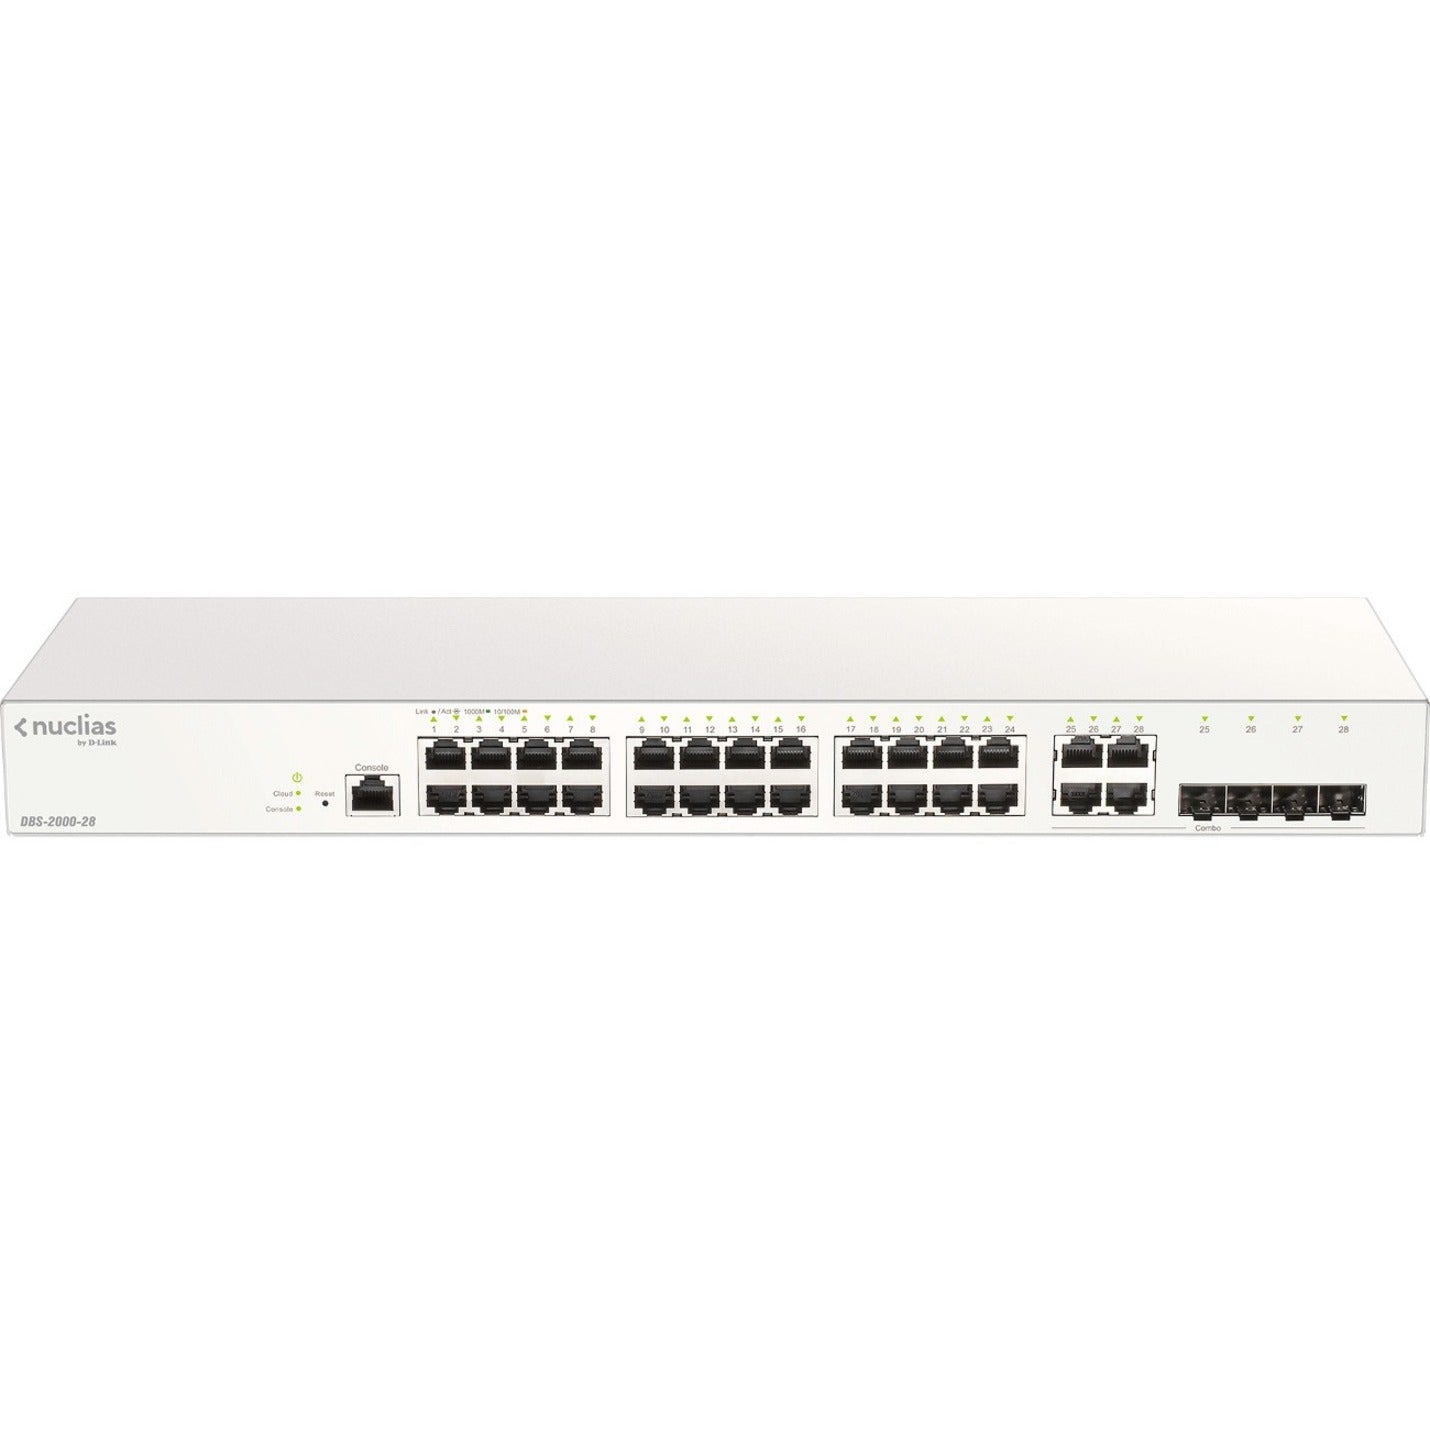 D-Link DBS-2000-28 28-Port Nuclias Cloud-Managed Switch, Gigabit Ethernet, Lifetime Warranty, Made in China